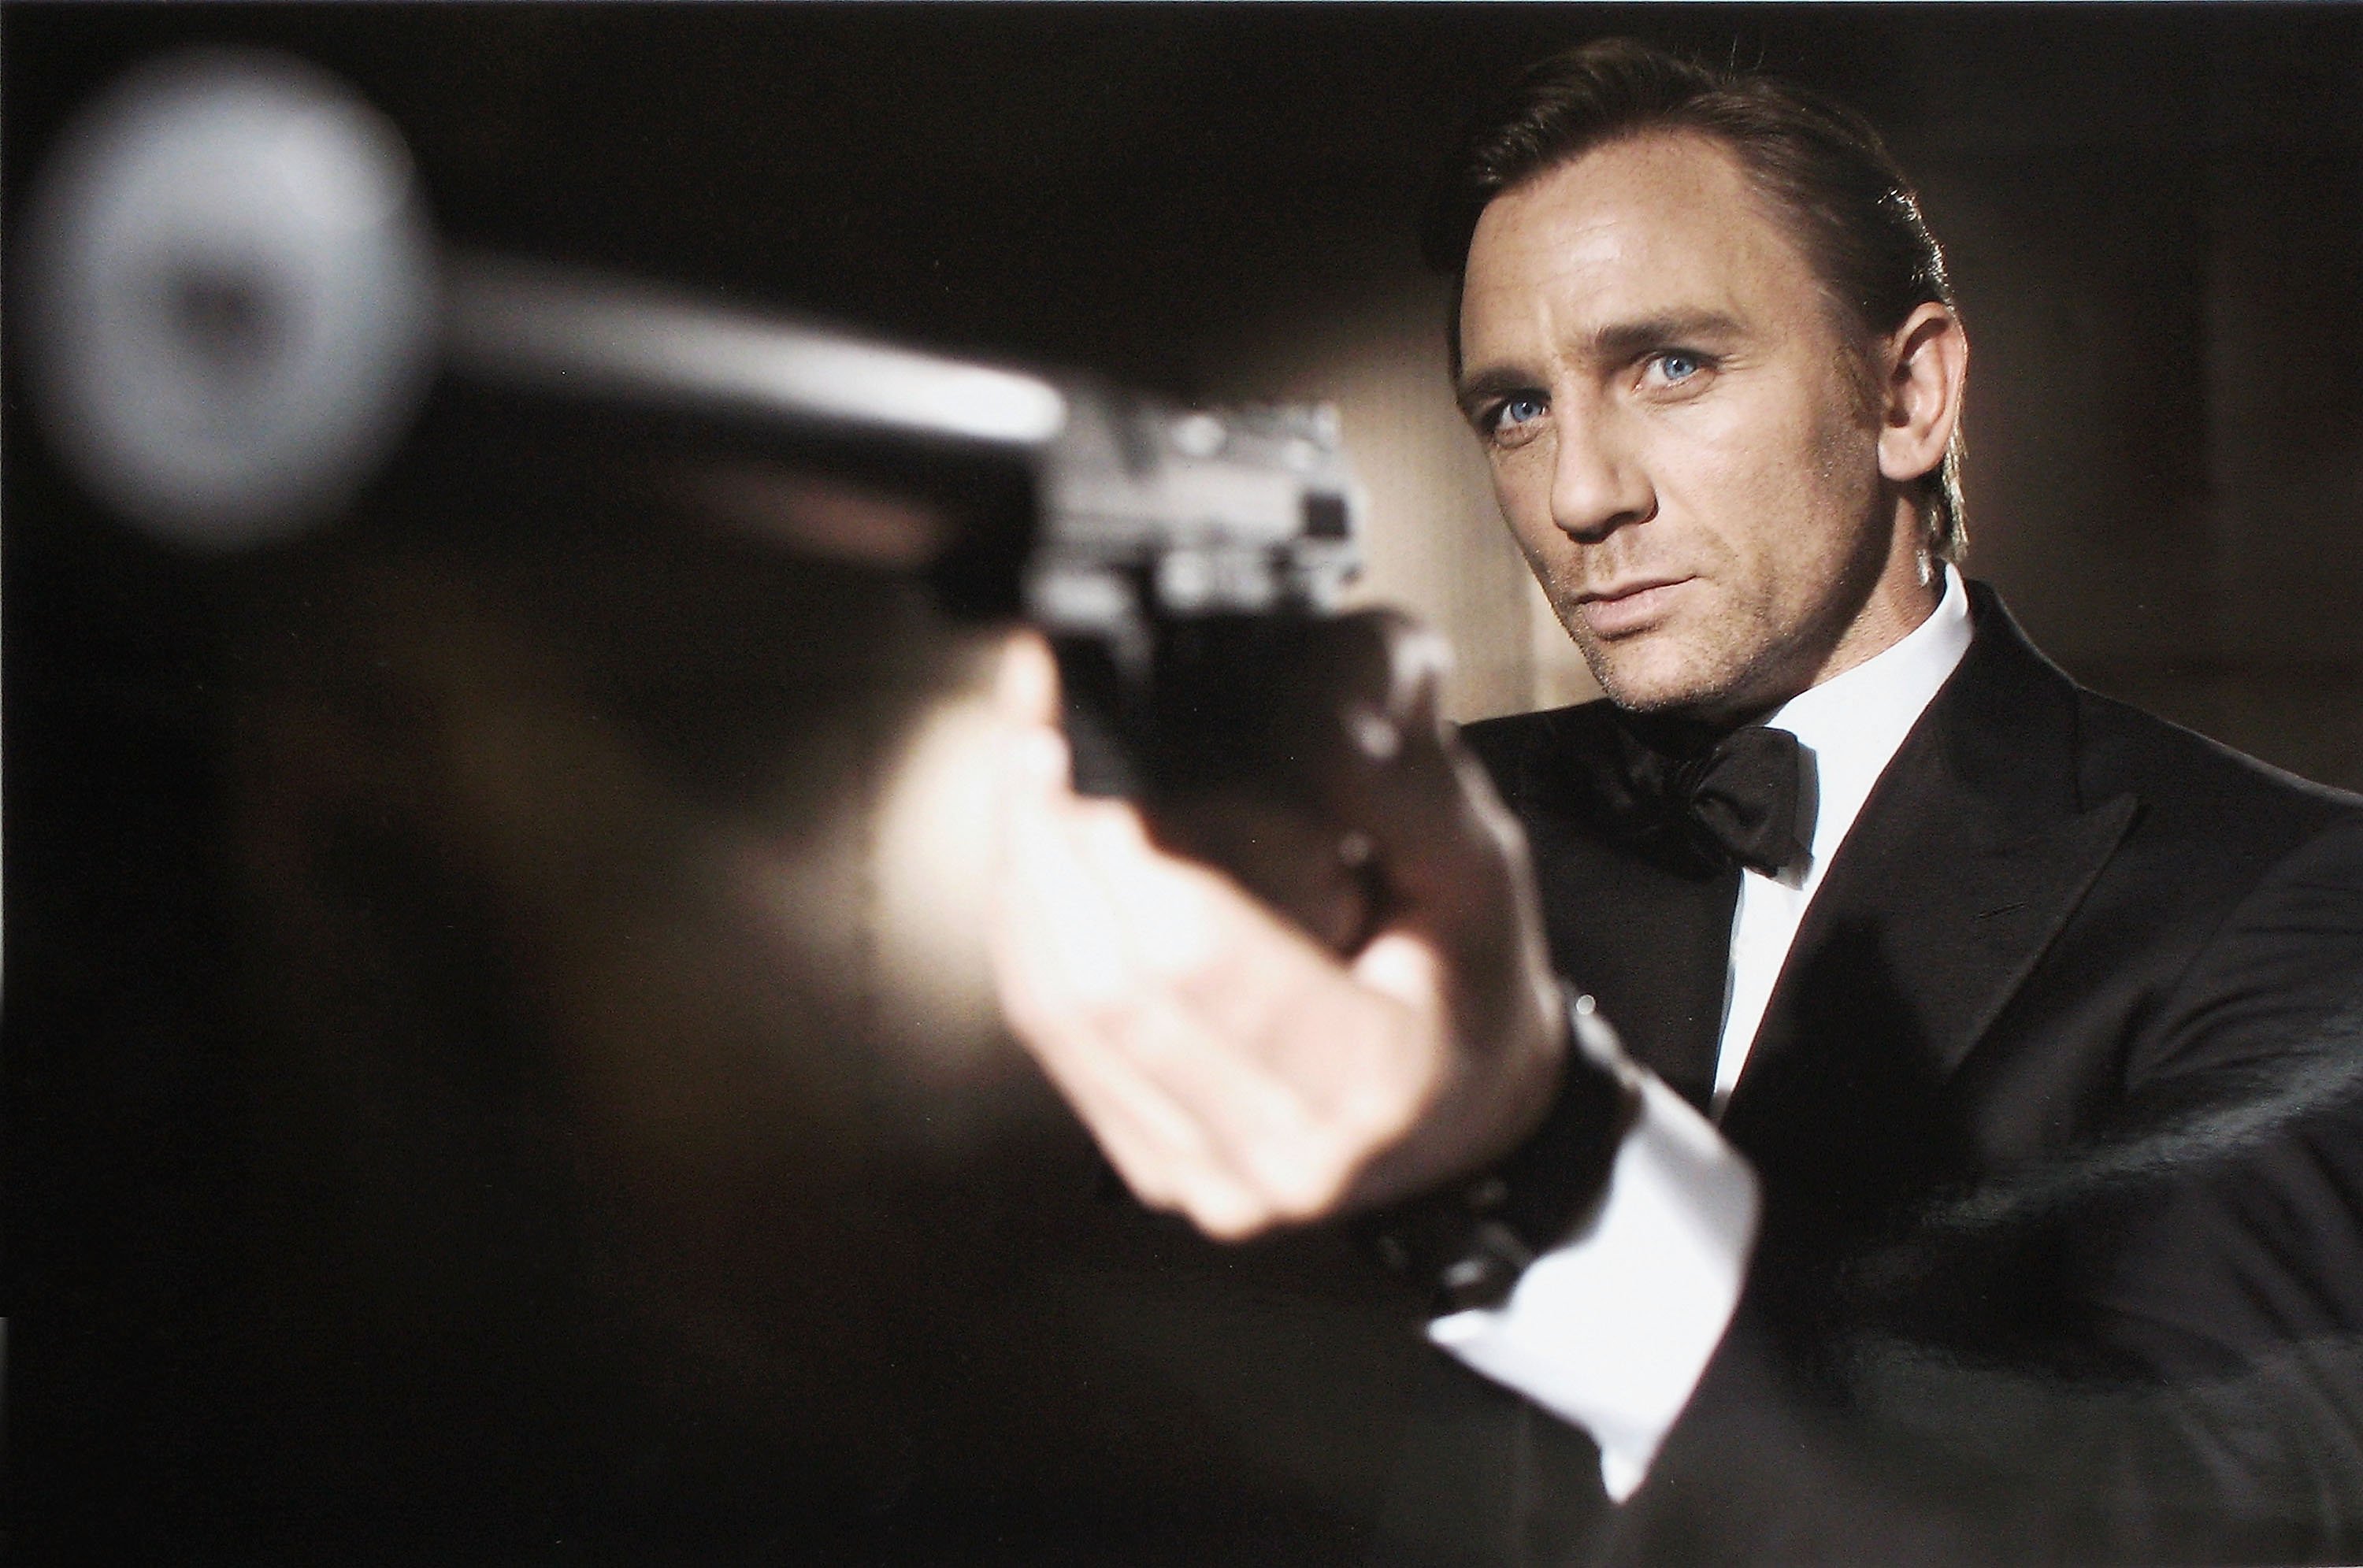 Daniel Craig, the leader of the No Time to Die cast, aims to shoot as James Bond